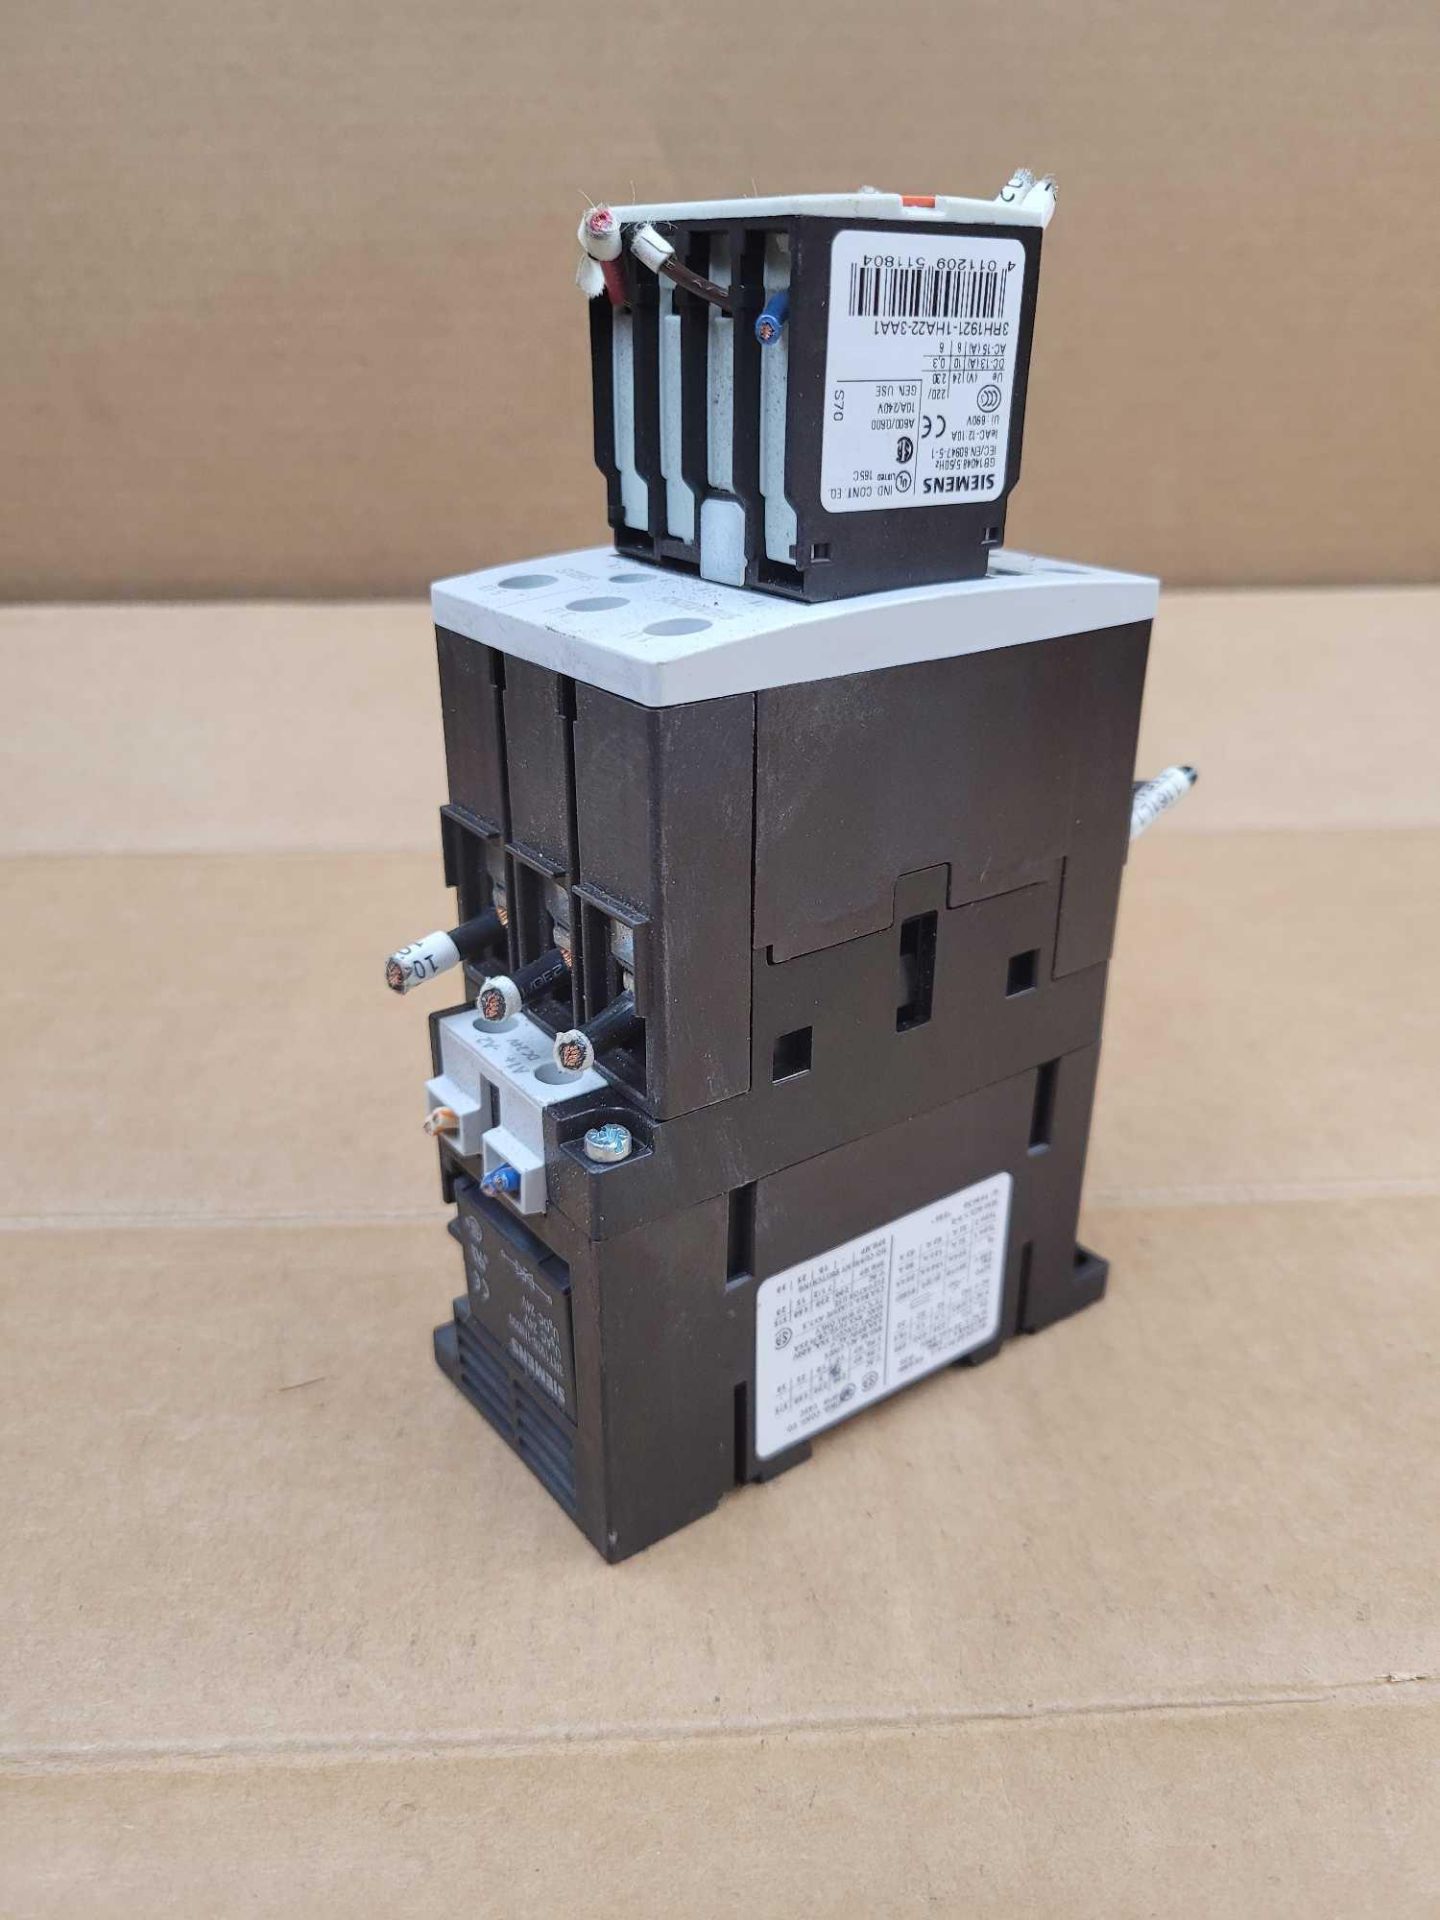 LOT OF 4 SIEMENS 3RT1034-1QB44-3MA0 / Power Contactor  /  Lot Weight: 13.2 lbs - Image 3 of 7